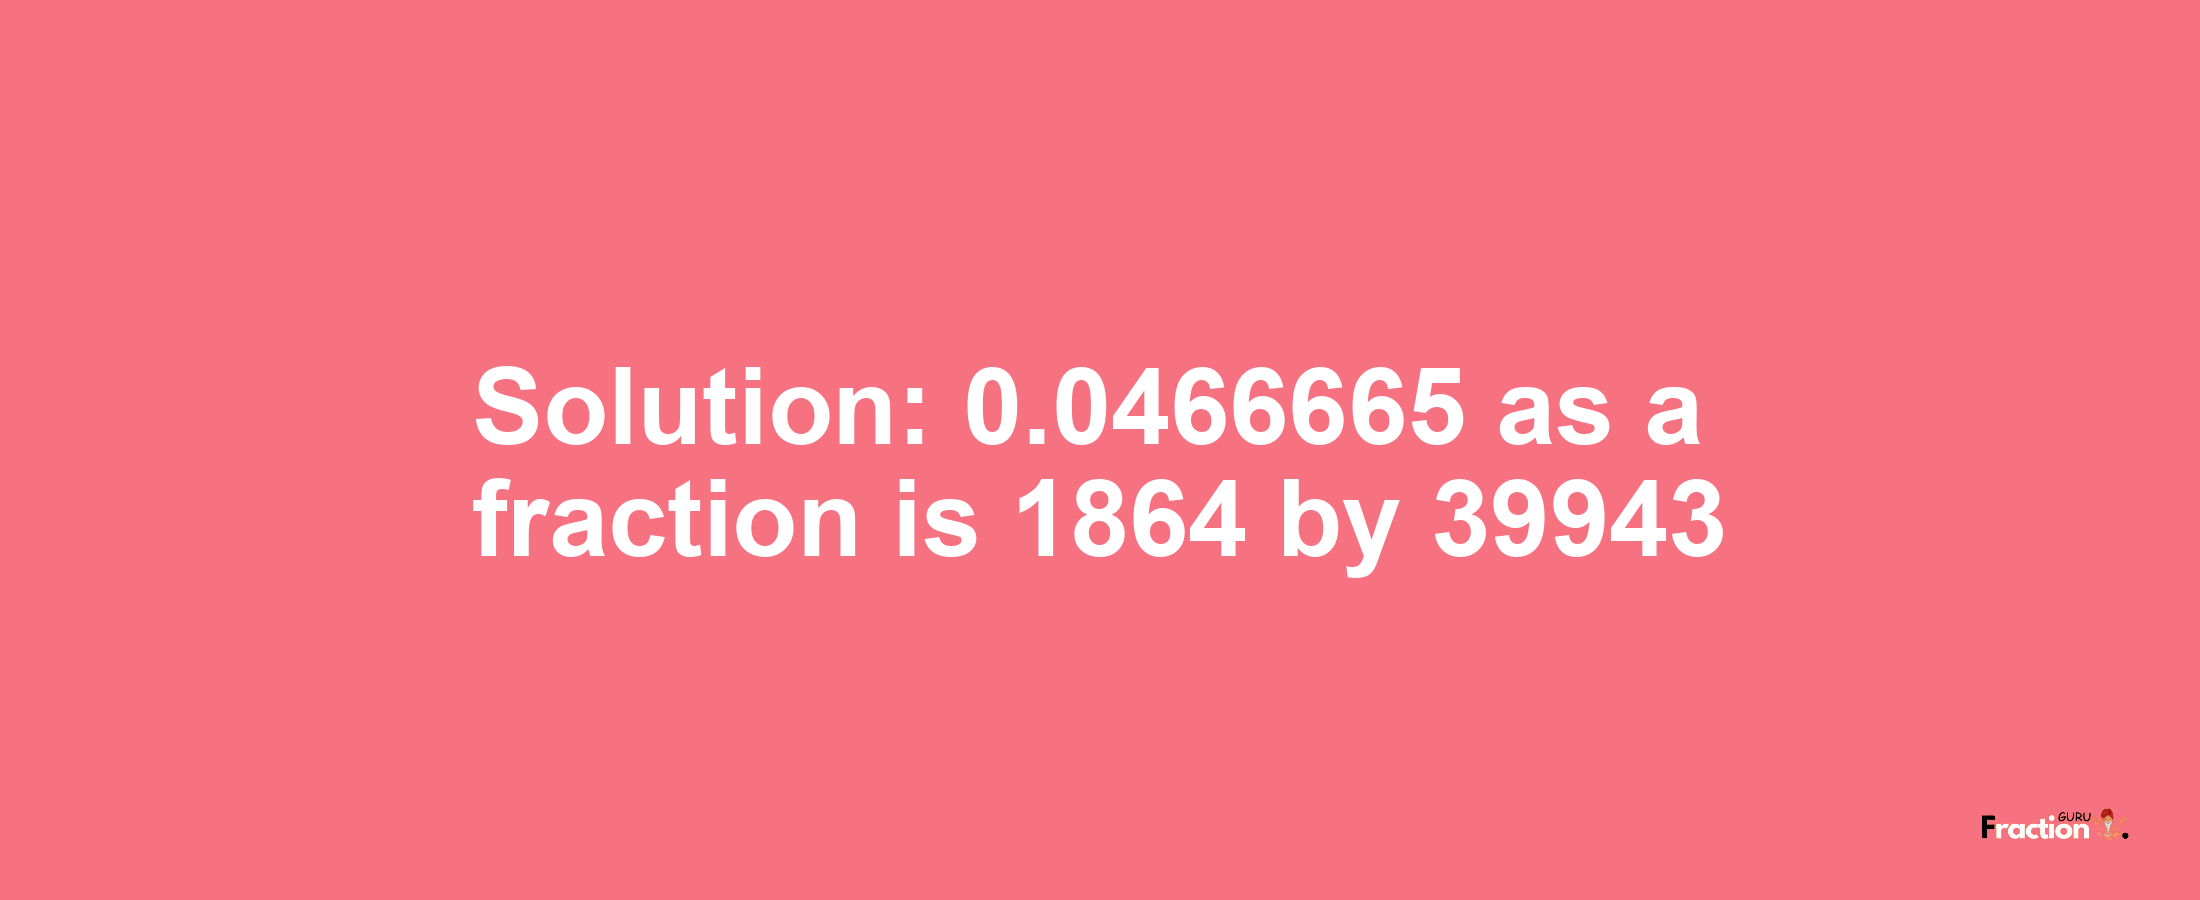 Solution:0.0466665 as a fraction is 1864/39943